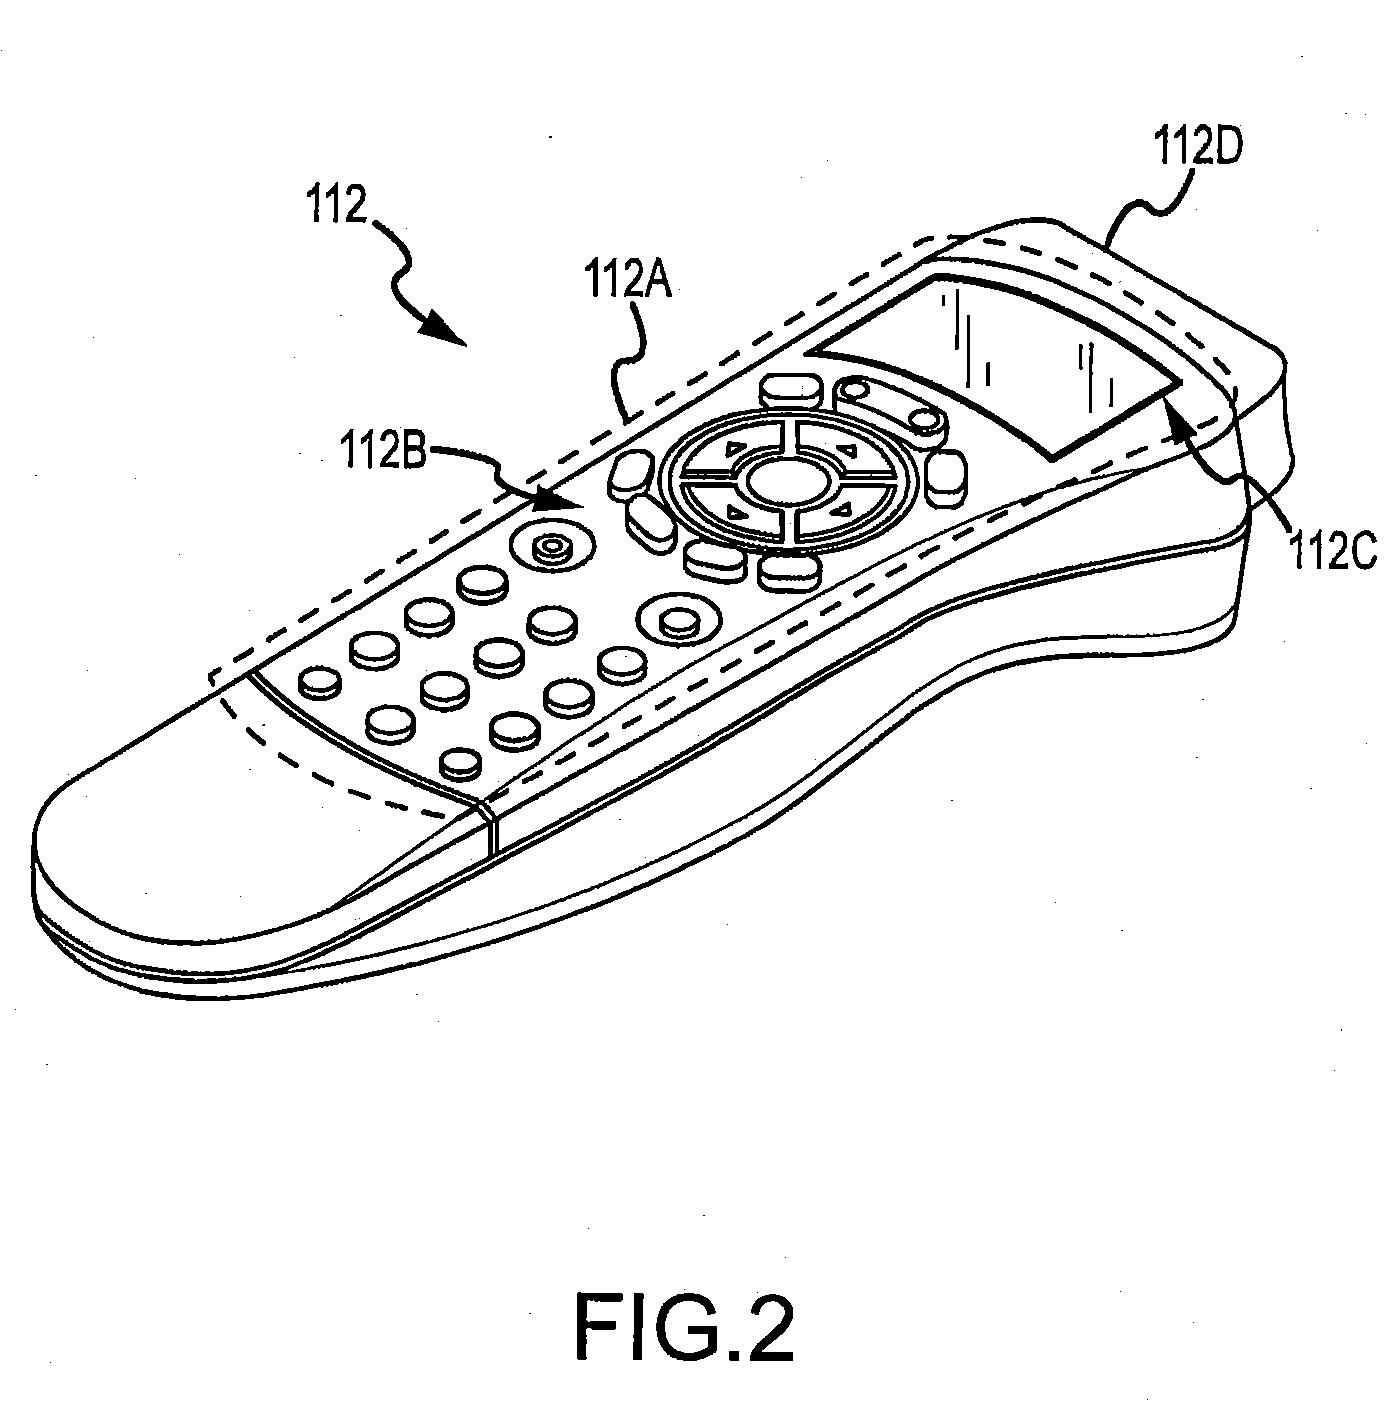 Systems and Methods for Remote Control Setup